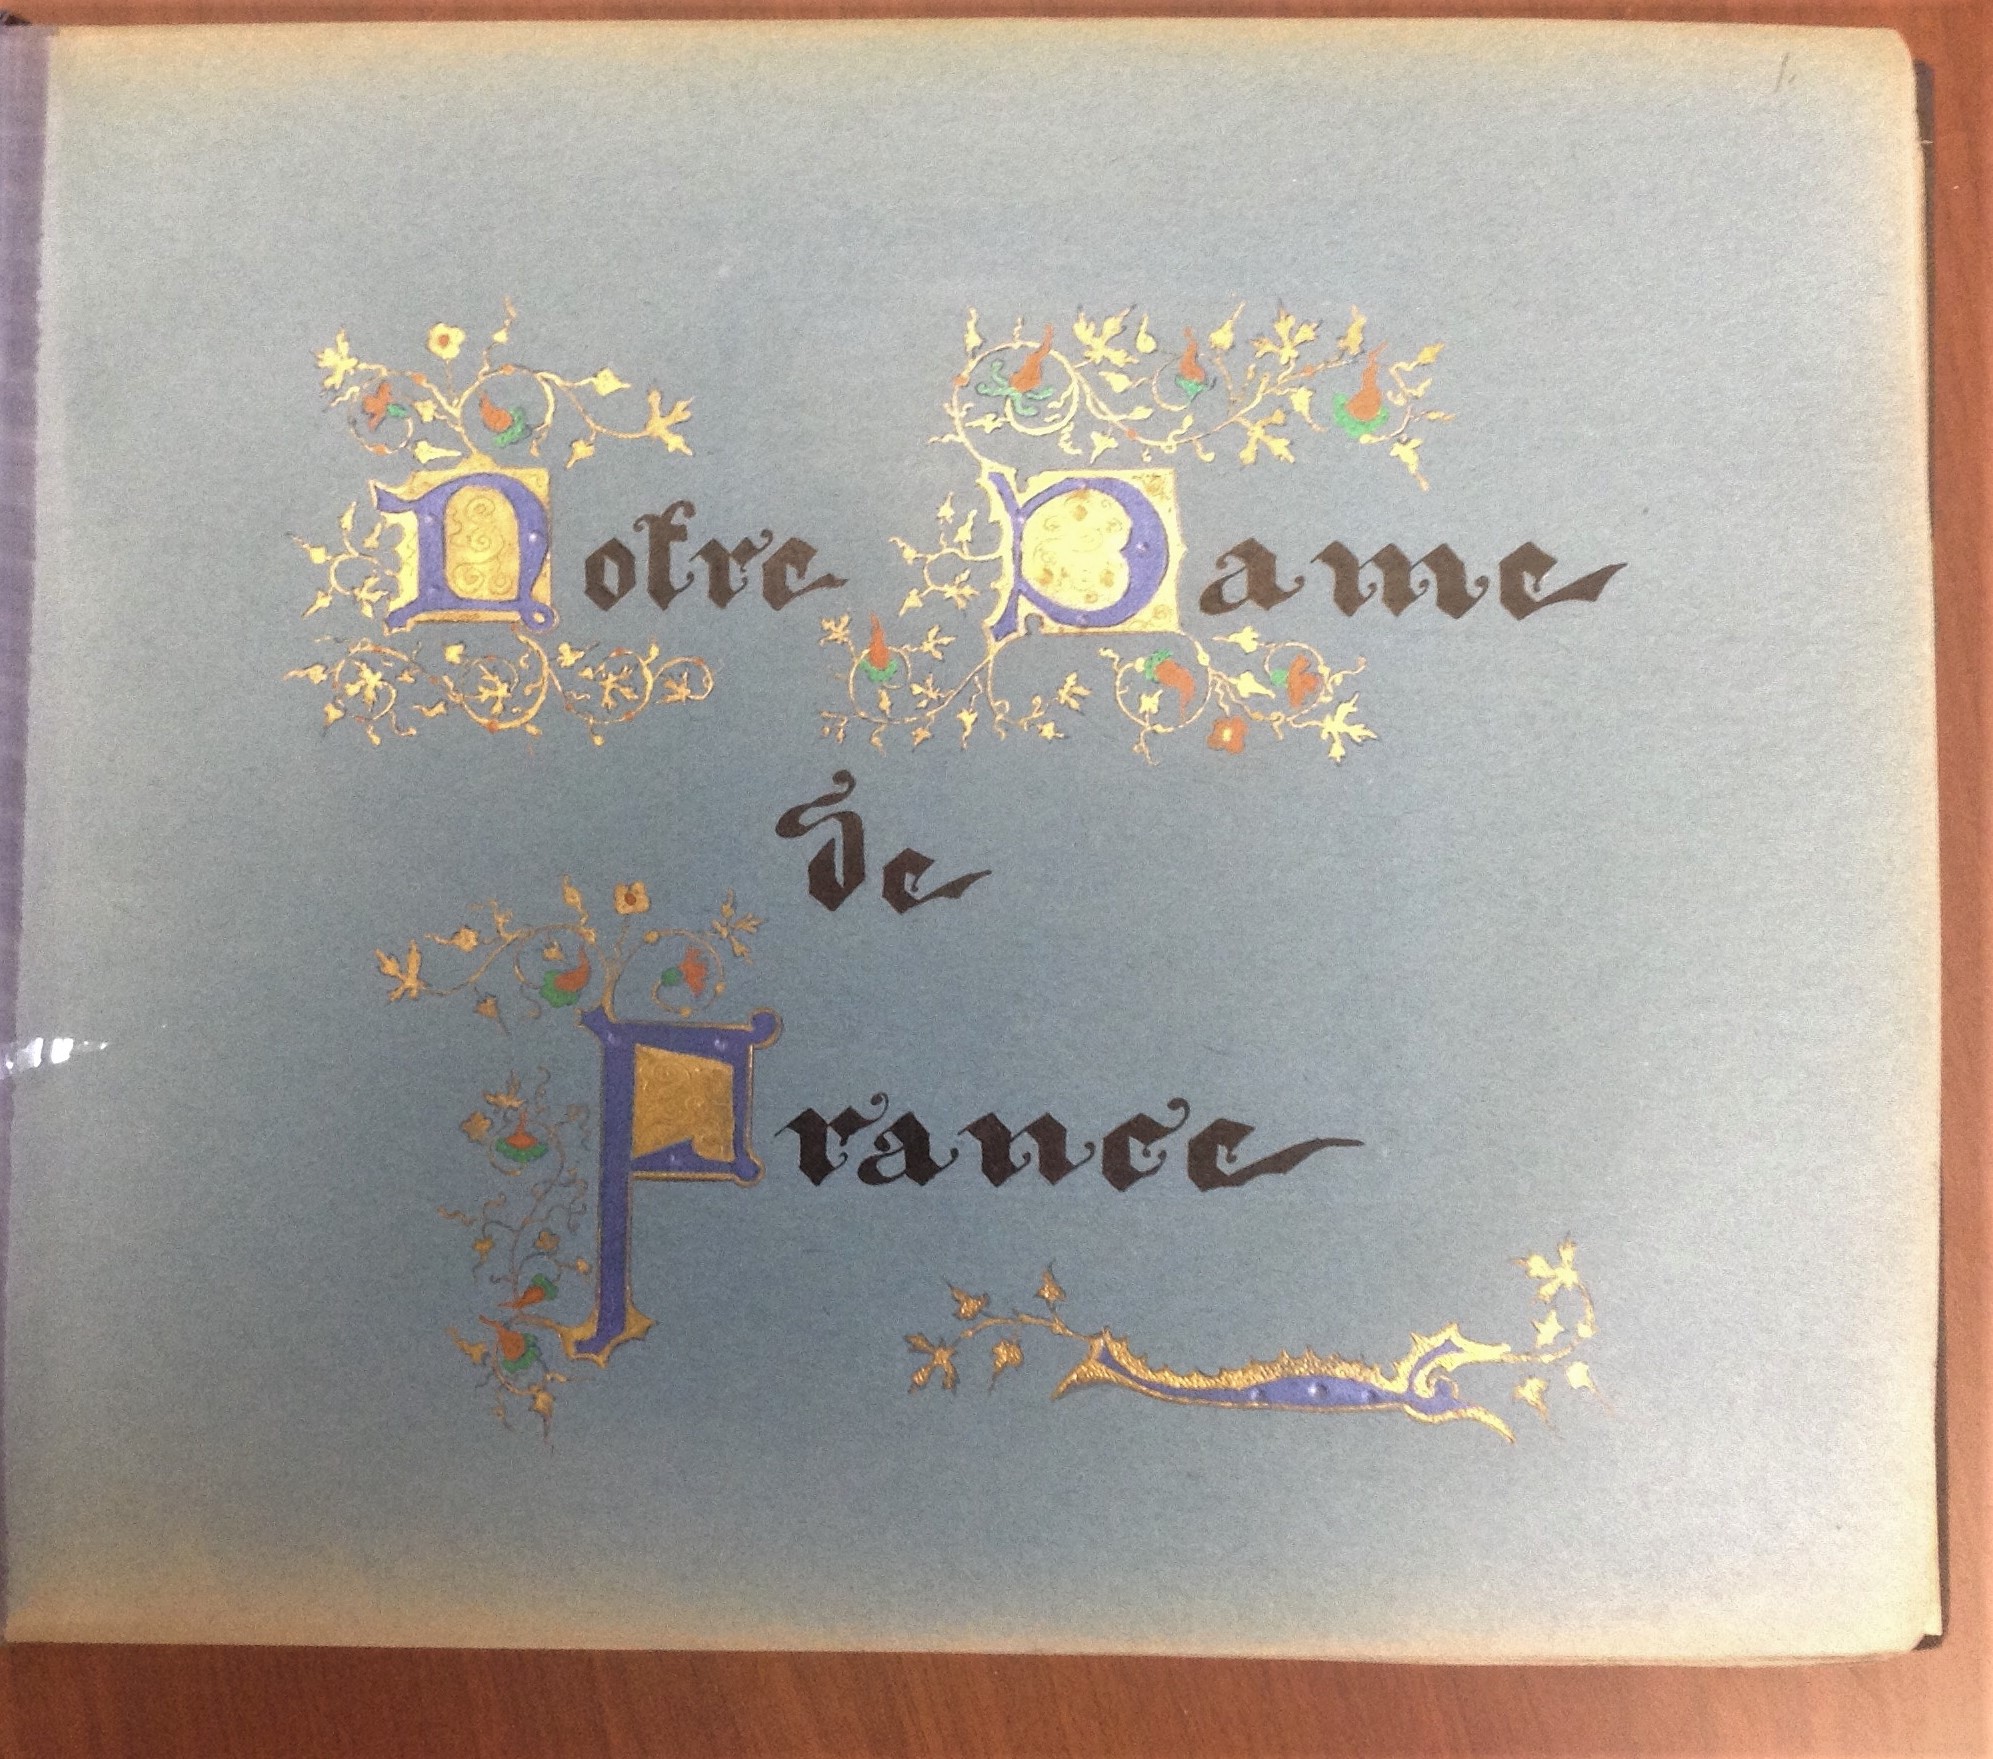 Words "Notre Dame de France" in calligraphy and embellished